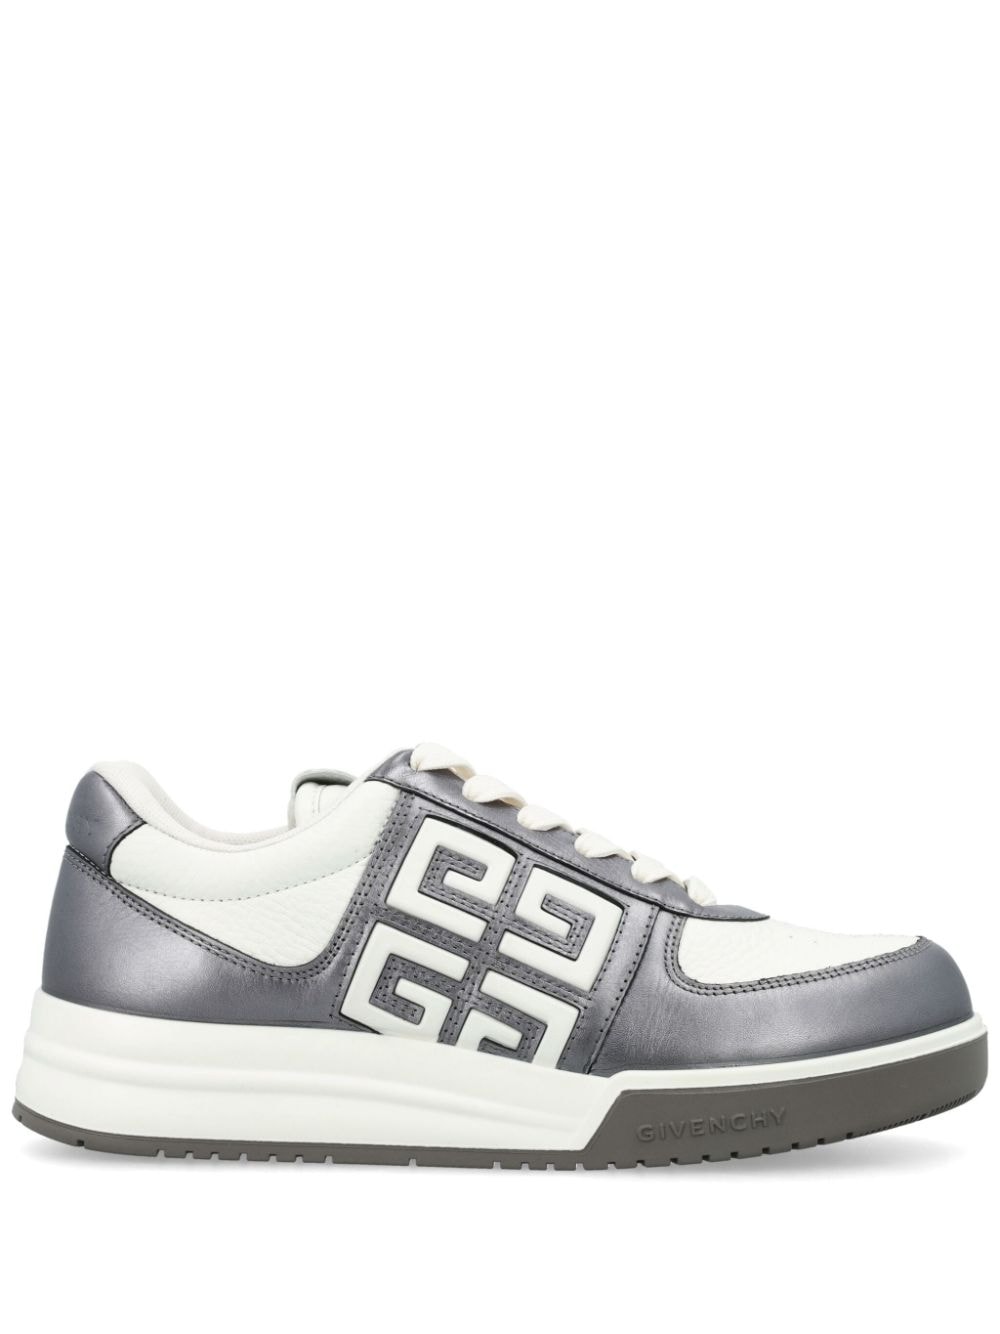 Givenchy G4 low-top leather sneakers - Silver von Givenchy